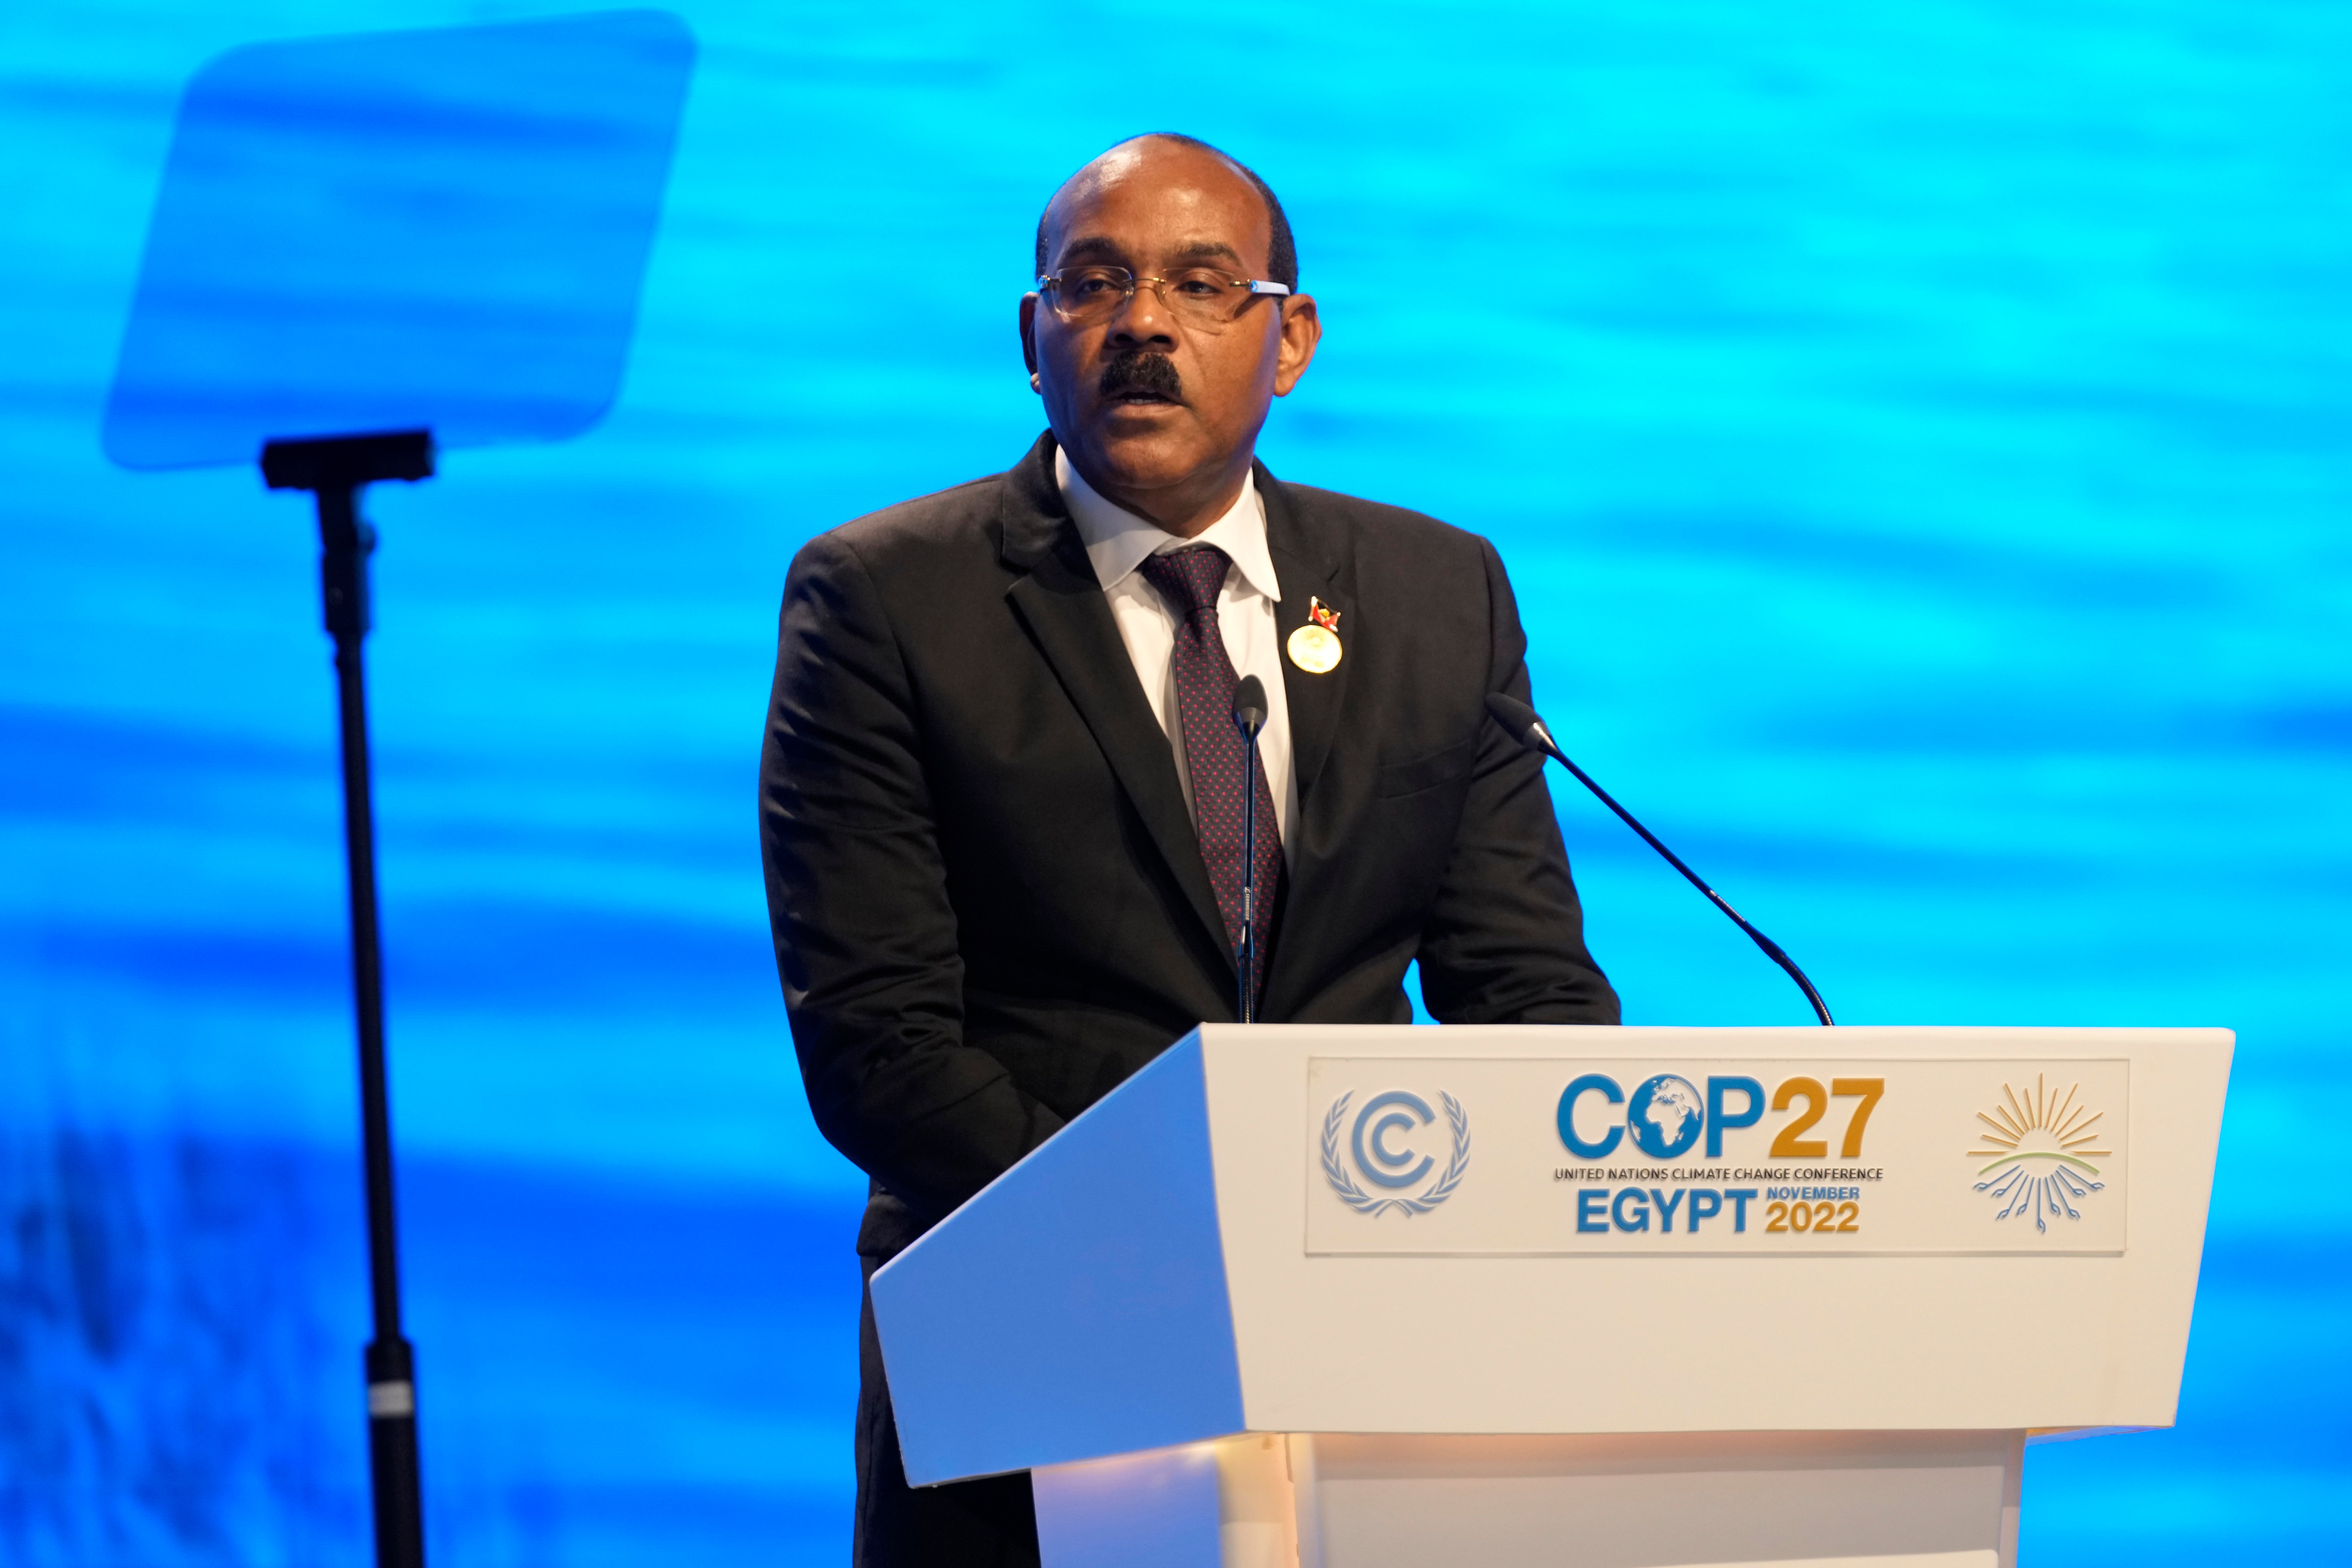 Gaston Browne, prime minister of Antigua and Barbuda, speaks at Cop27 last Tuesday